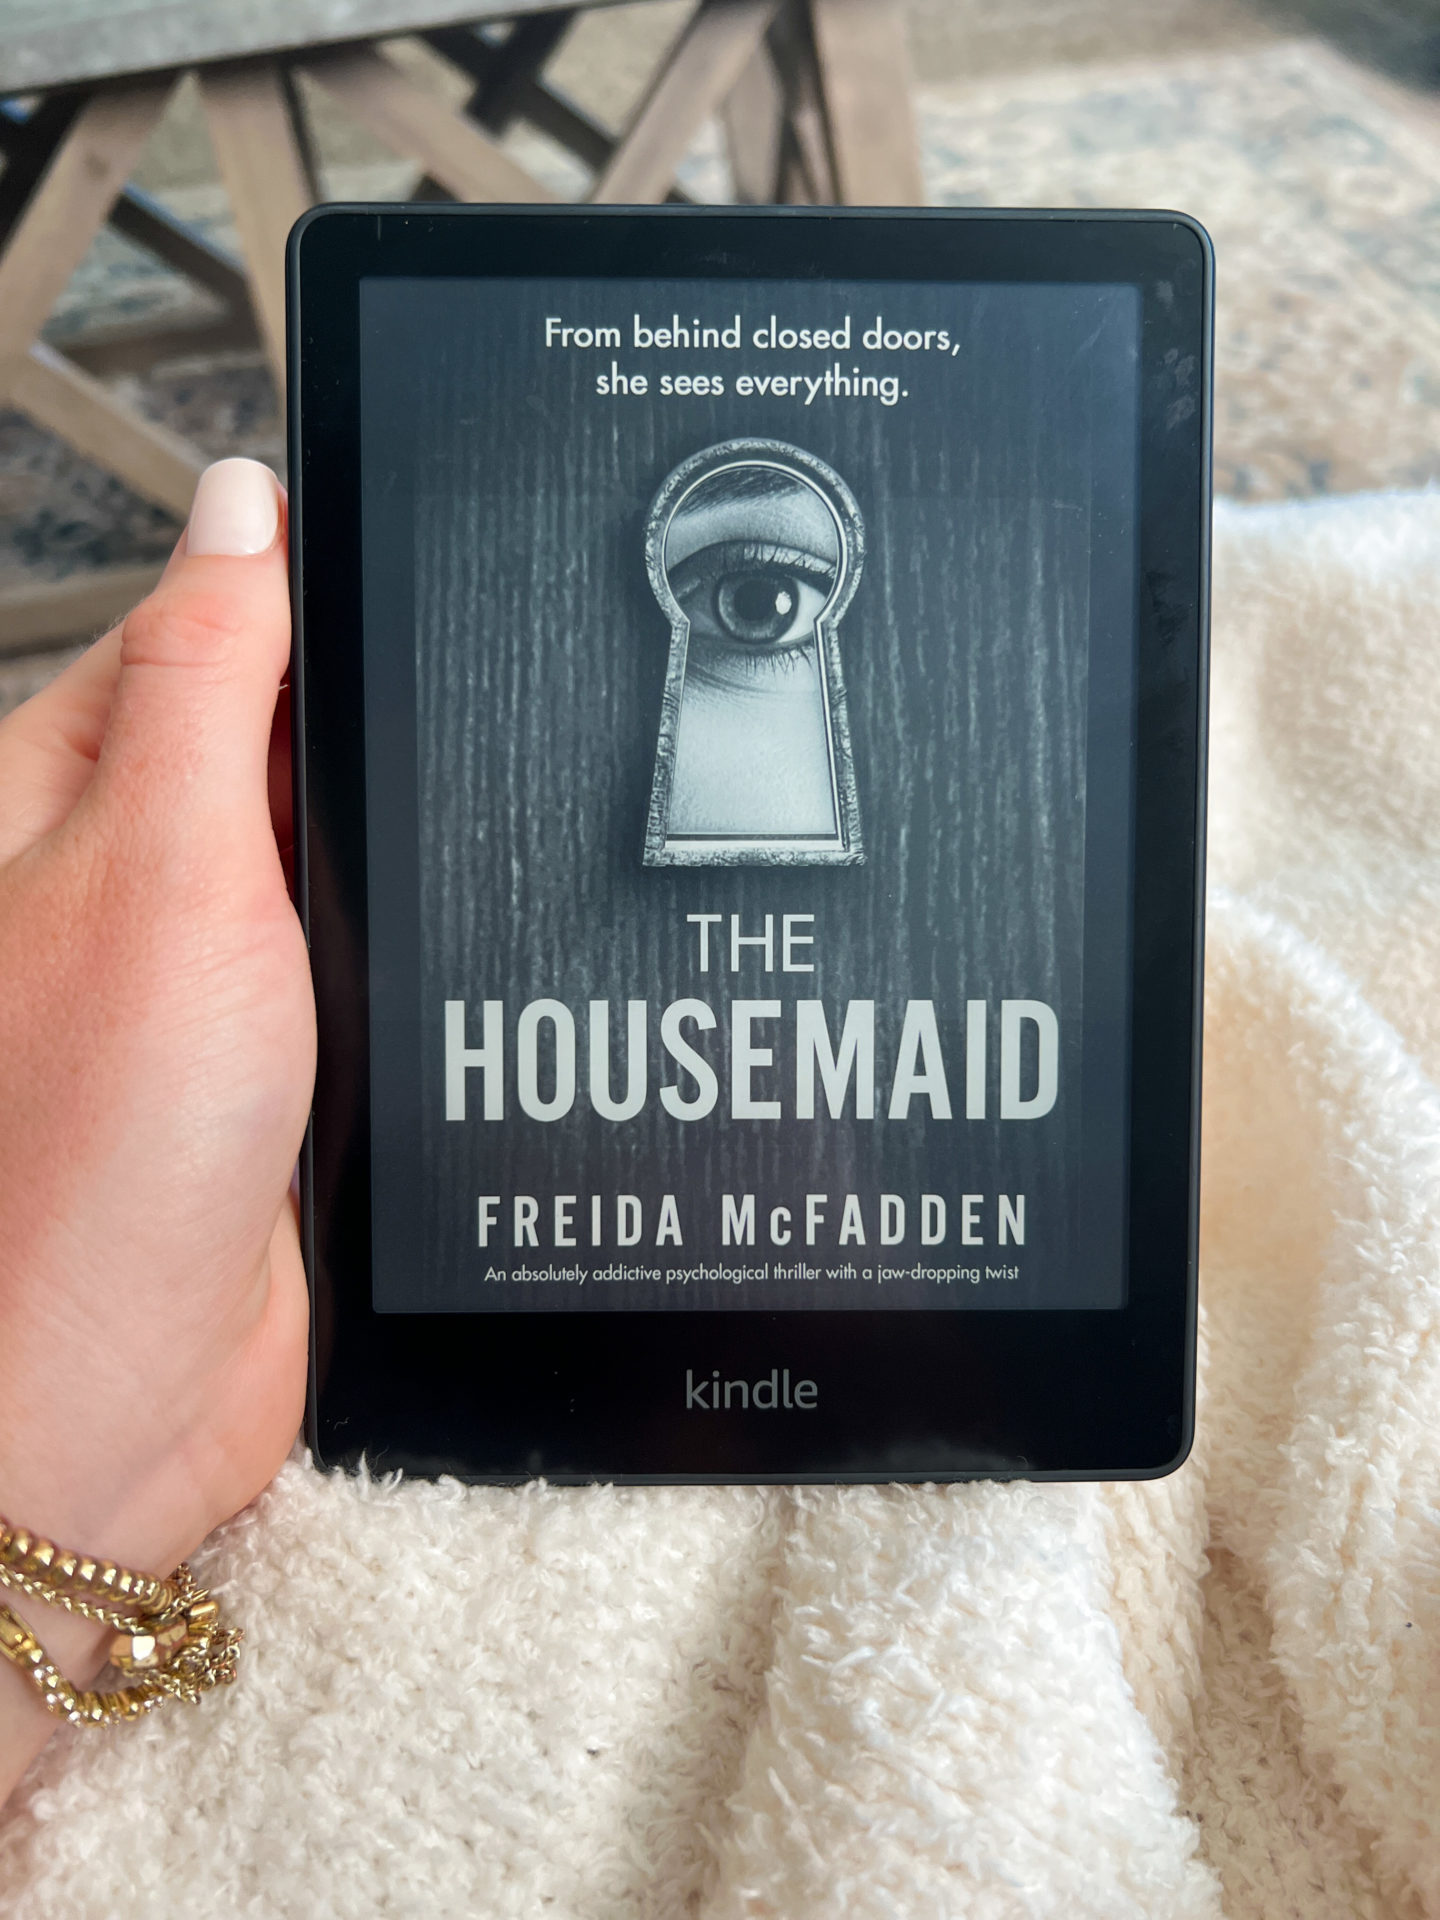 the housemaid book review guardian